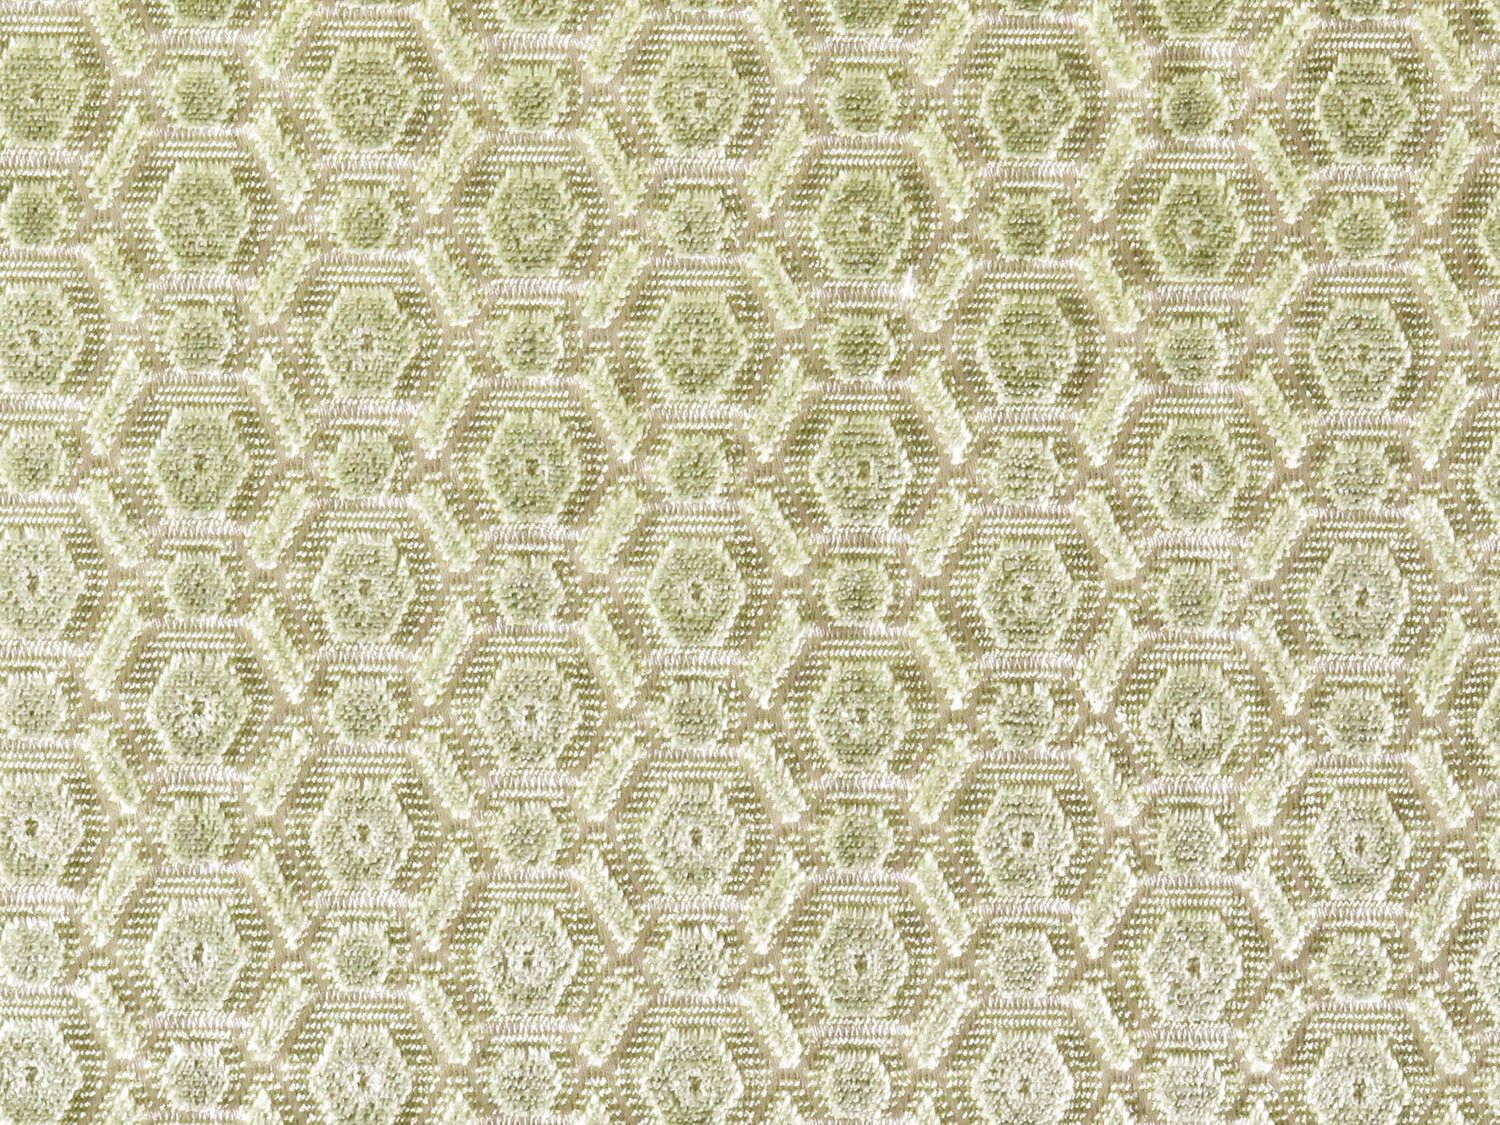 Manetta fabric in spring color - pattern number ZS 0007MANE - by Scalamandre in the Old World Weavers collection